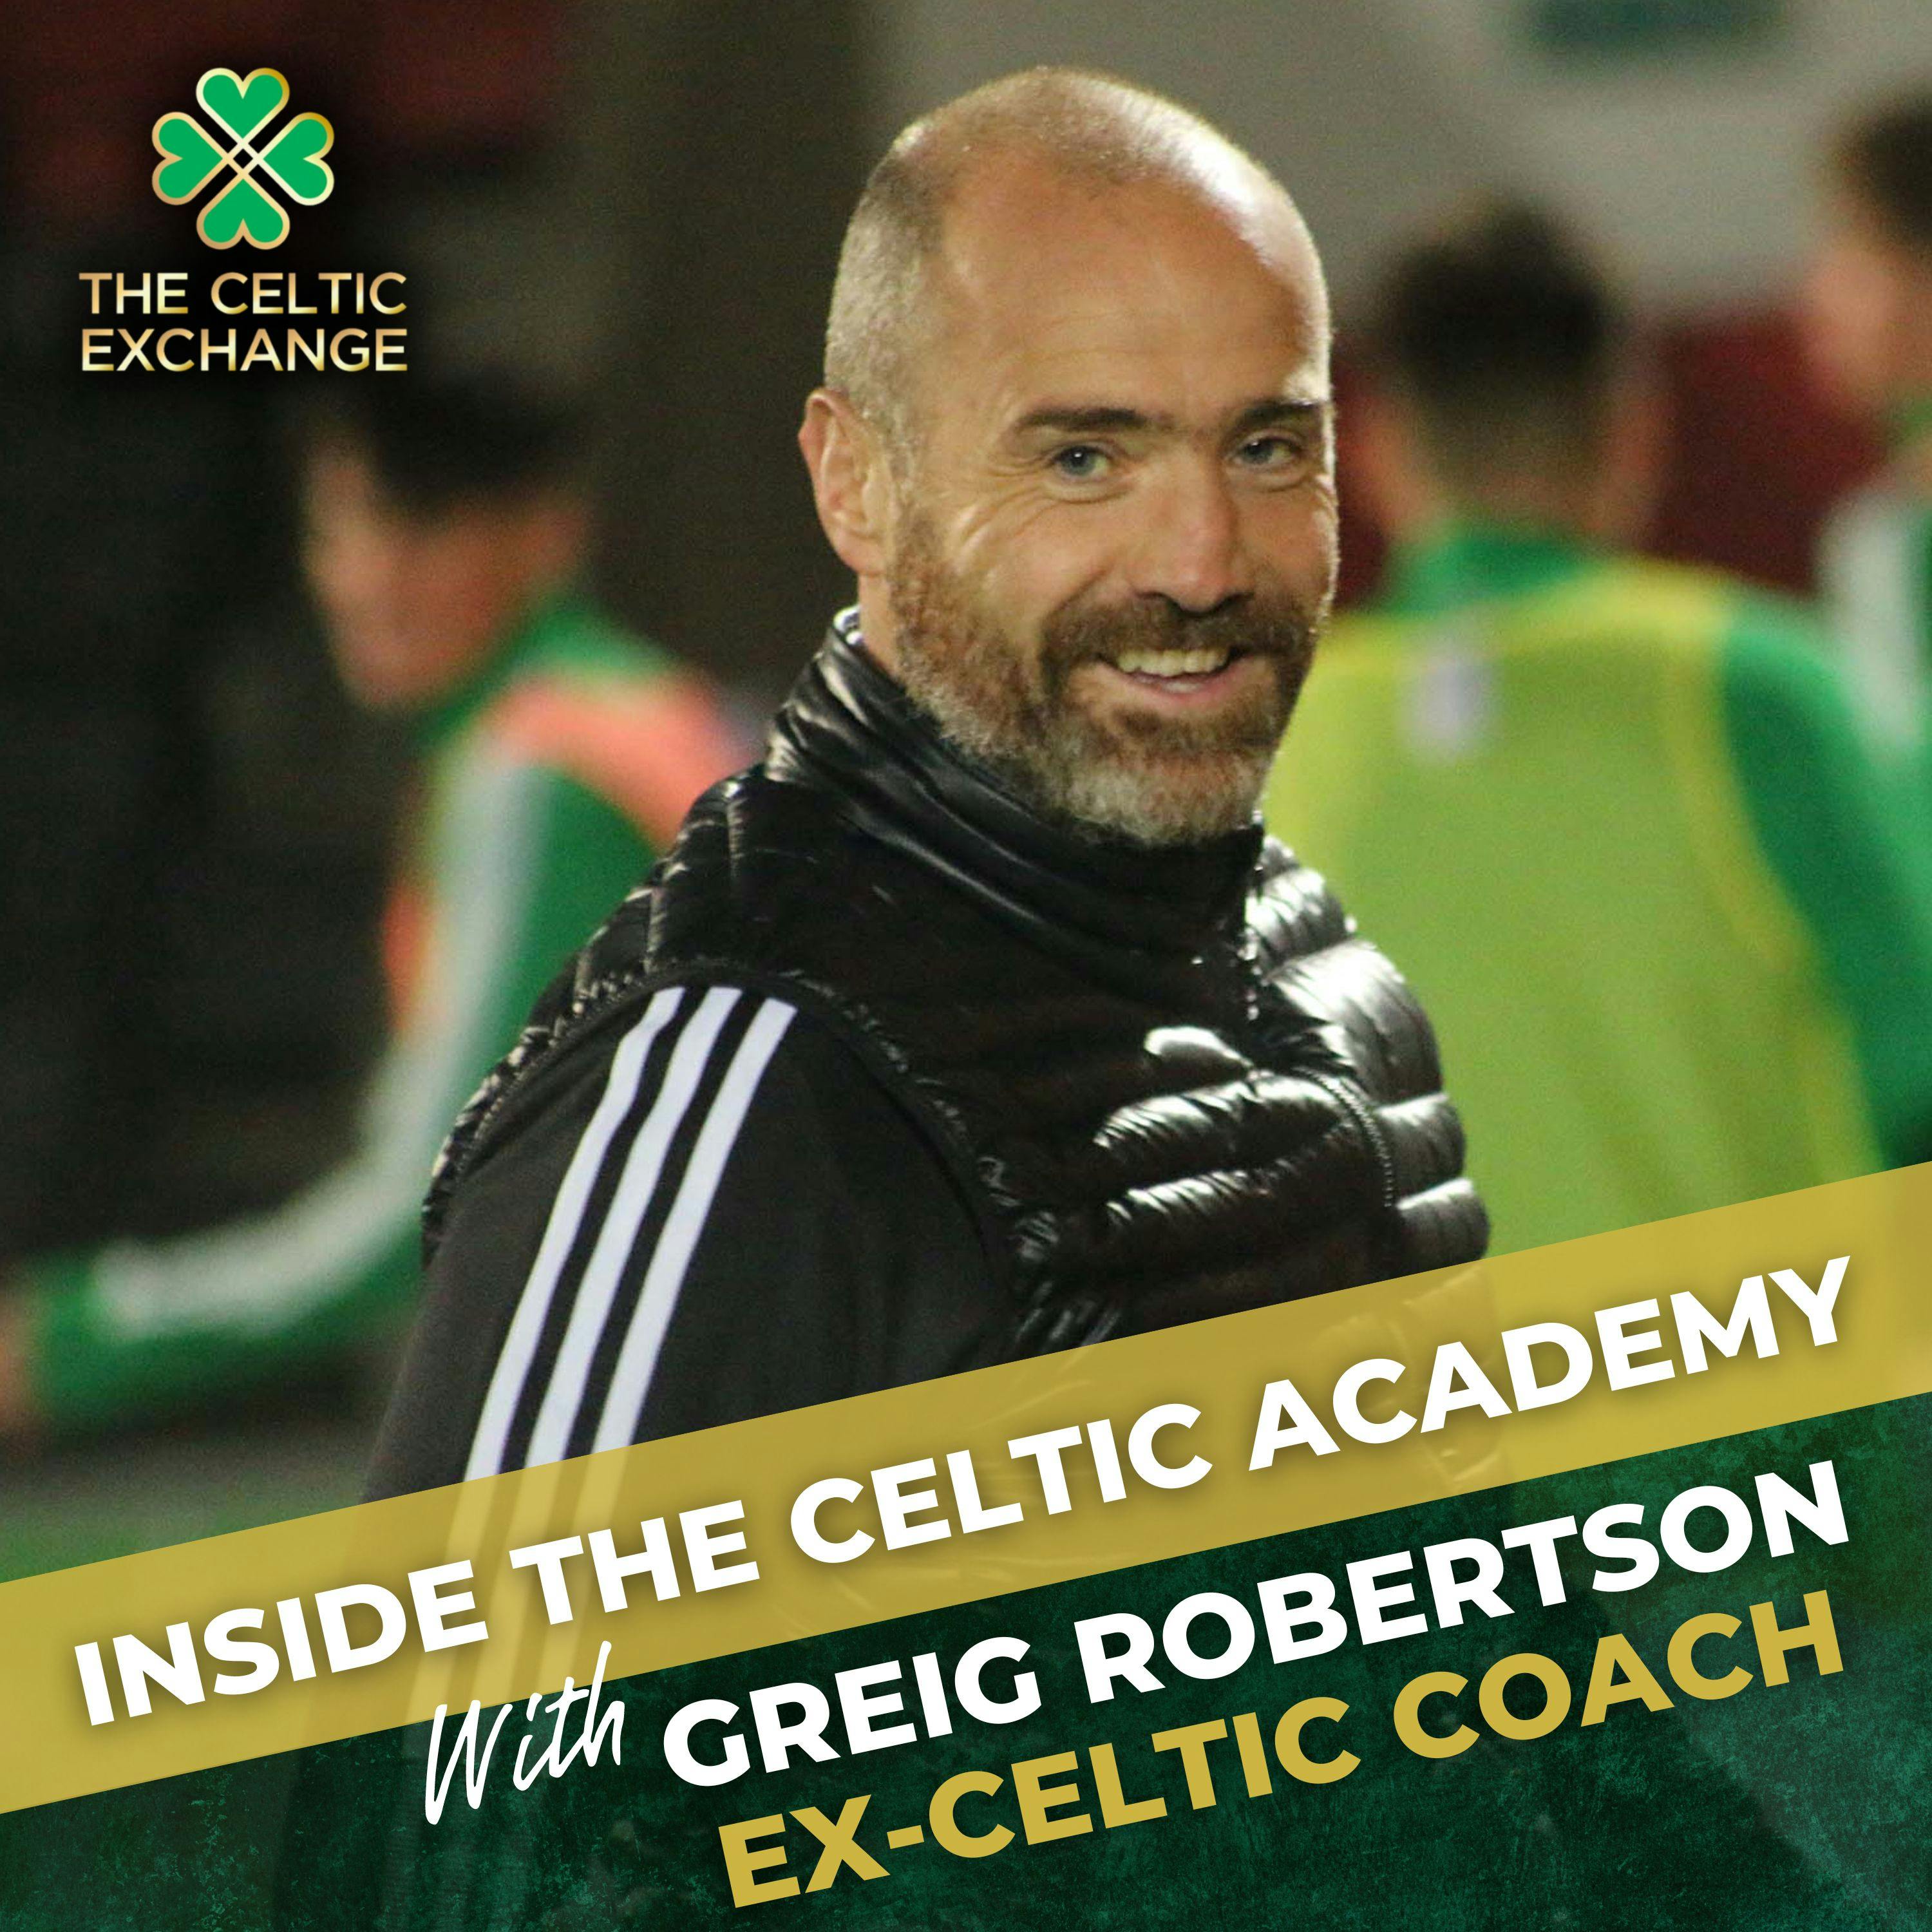 Inside The Celtic Academy, With Former Celtic Coach Greig Robertson (Re-Release)